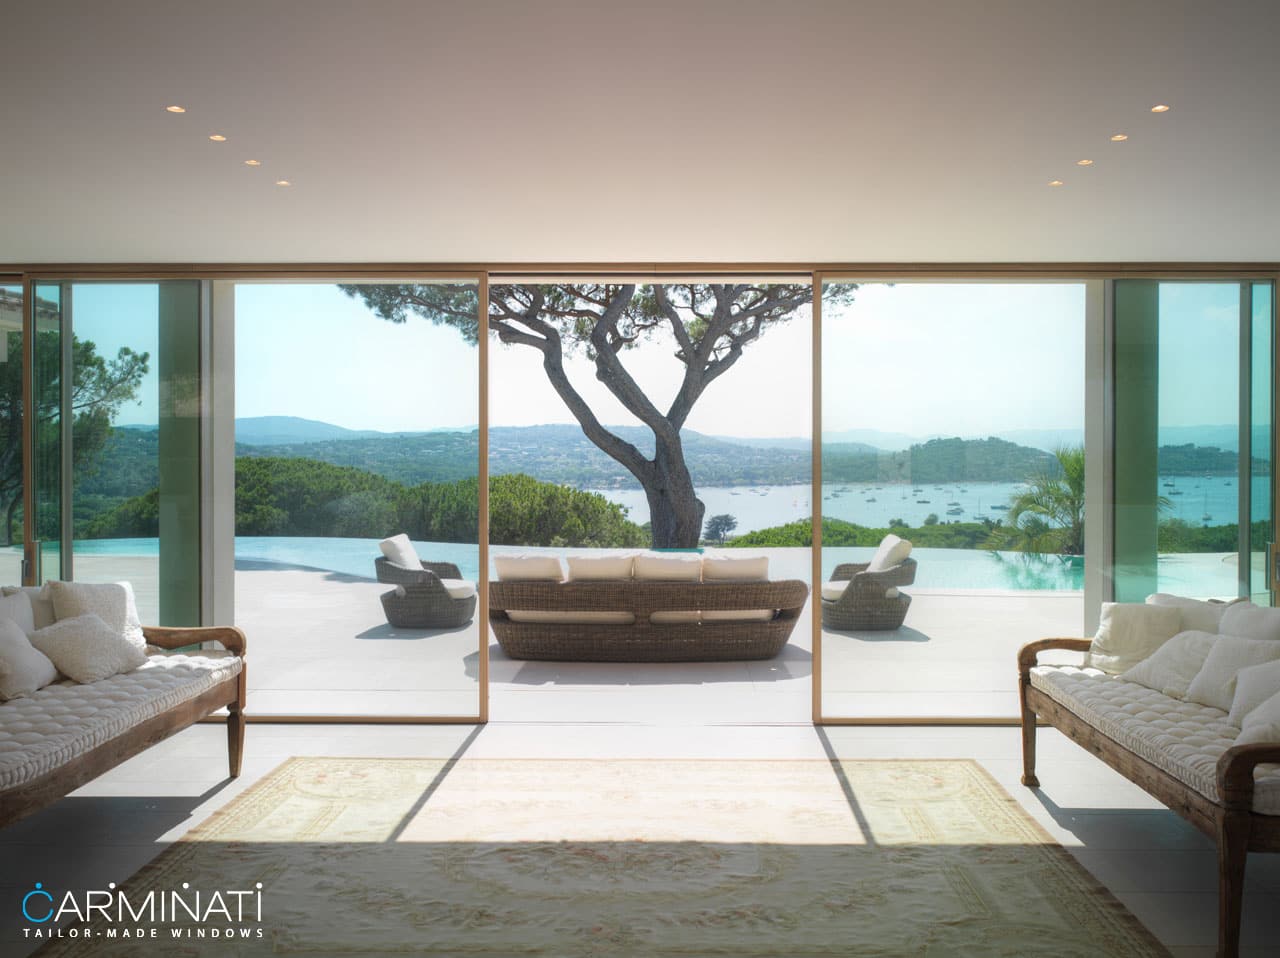 A minimal frame lift slide door system by Carminati opens this villa to the beautiful views of Saint Tropez